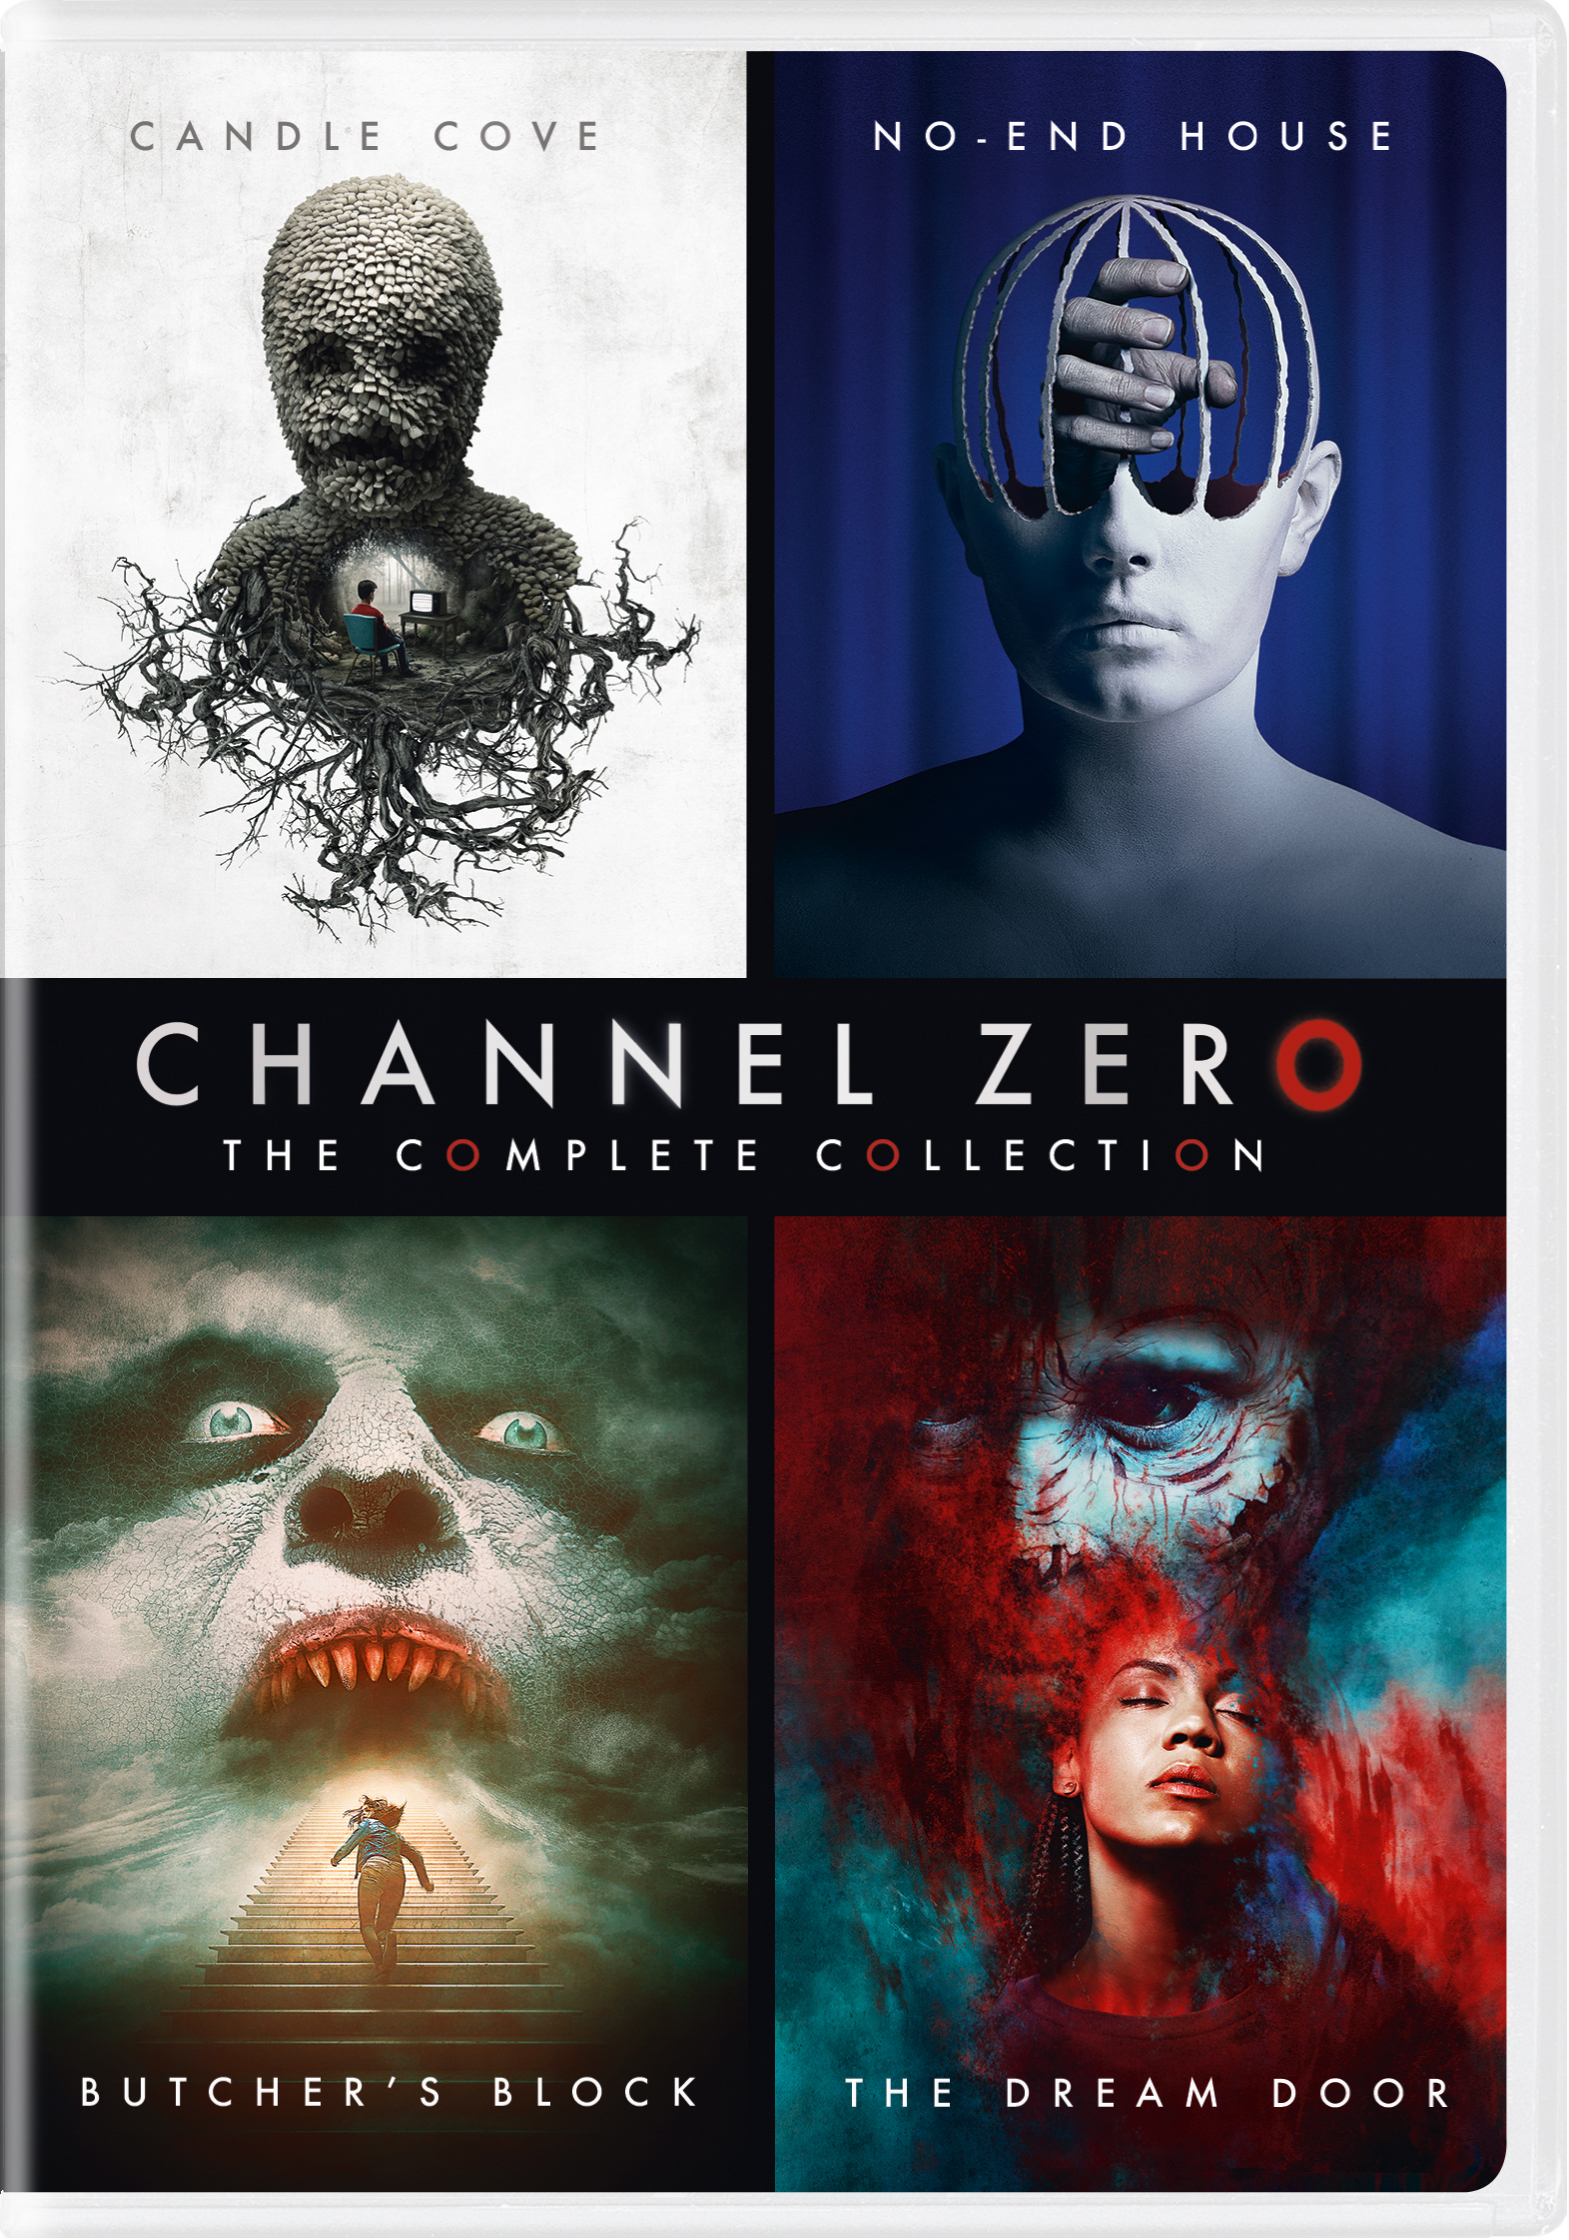 Channel Zero: Candle Cove - Season One, Television Series Page, DVD, Blu- ray, Digital HD, On Demand, Trailers, Downloads